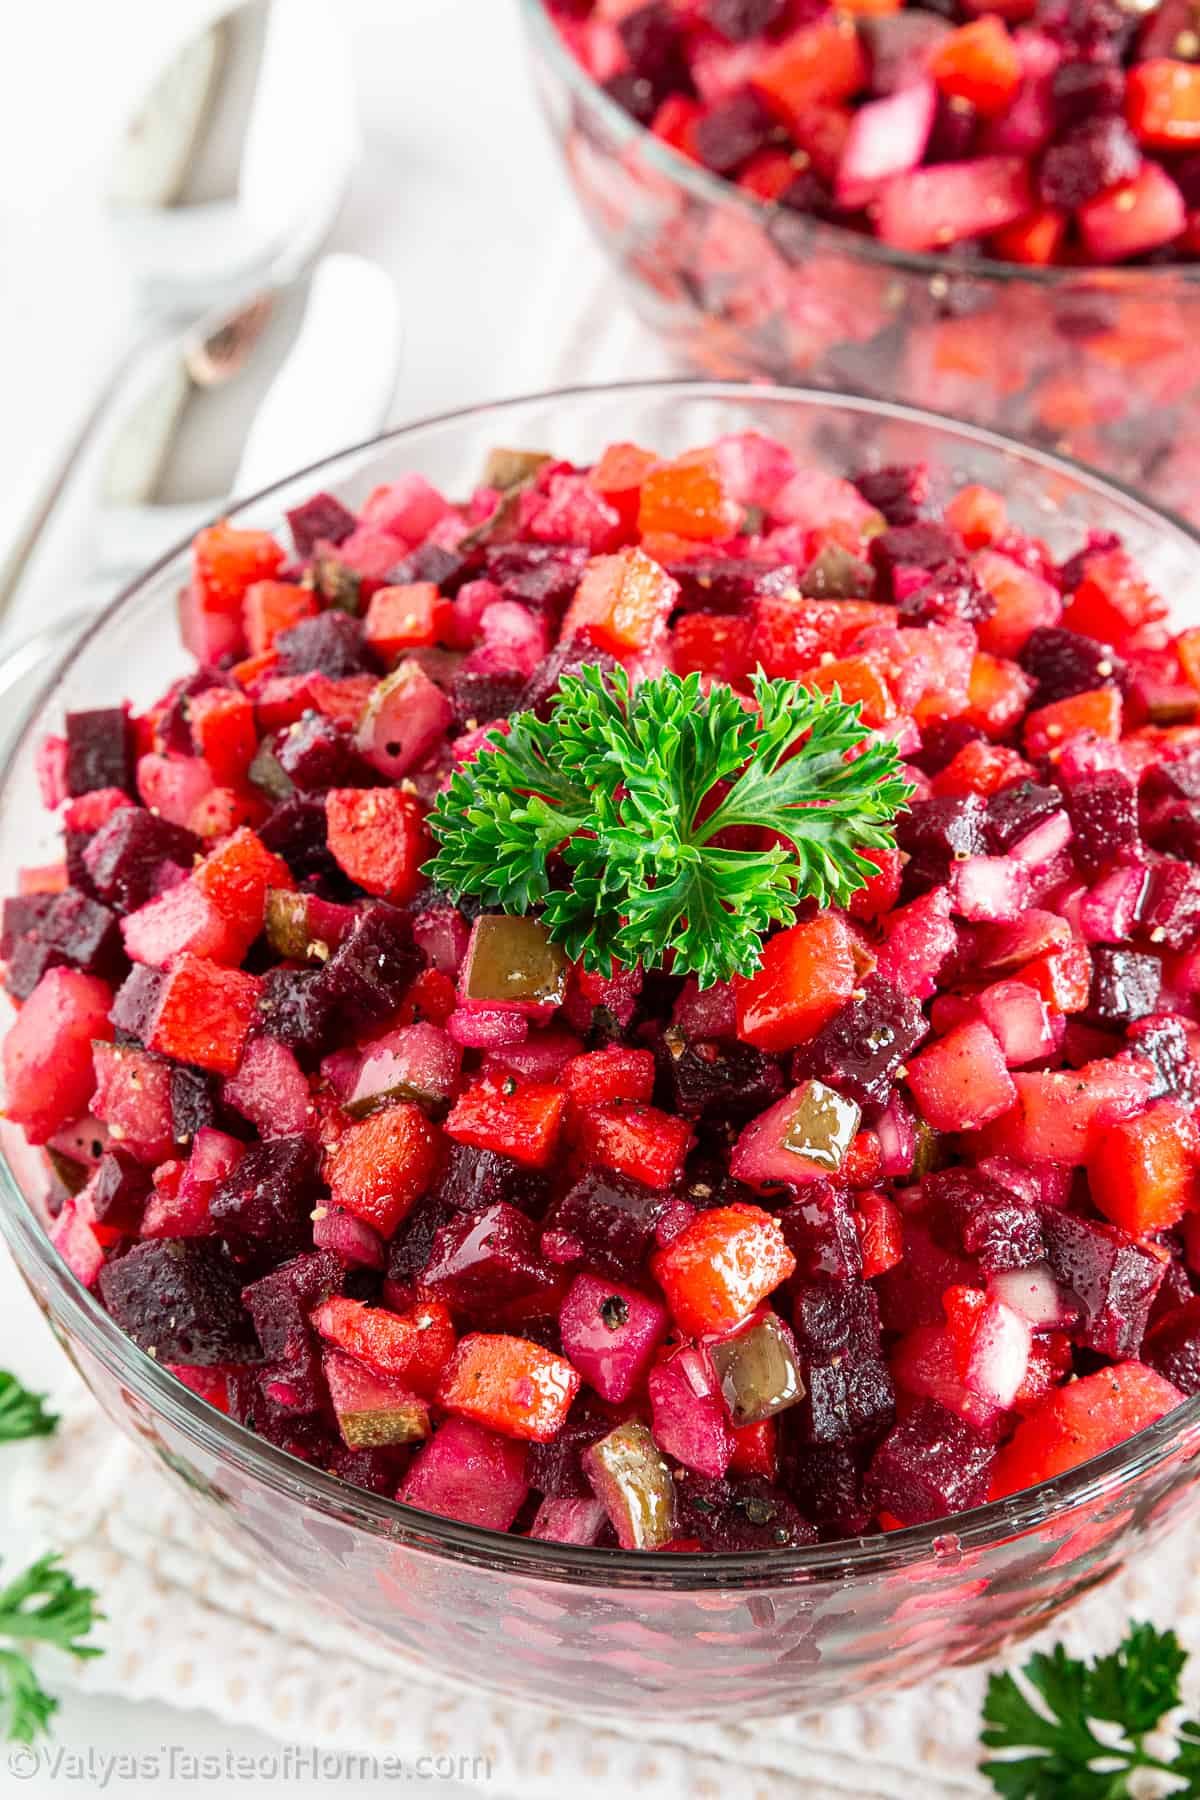 The colors in this recipe make it an ideal salad to make for the holidays to serve with any and all dishes you’re planning on serving. Plus, this is a classic Ukrainian beet salad and so the ingredients are simple and delicious, and truly one of a kind.